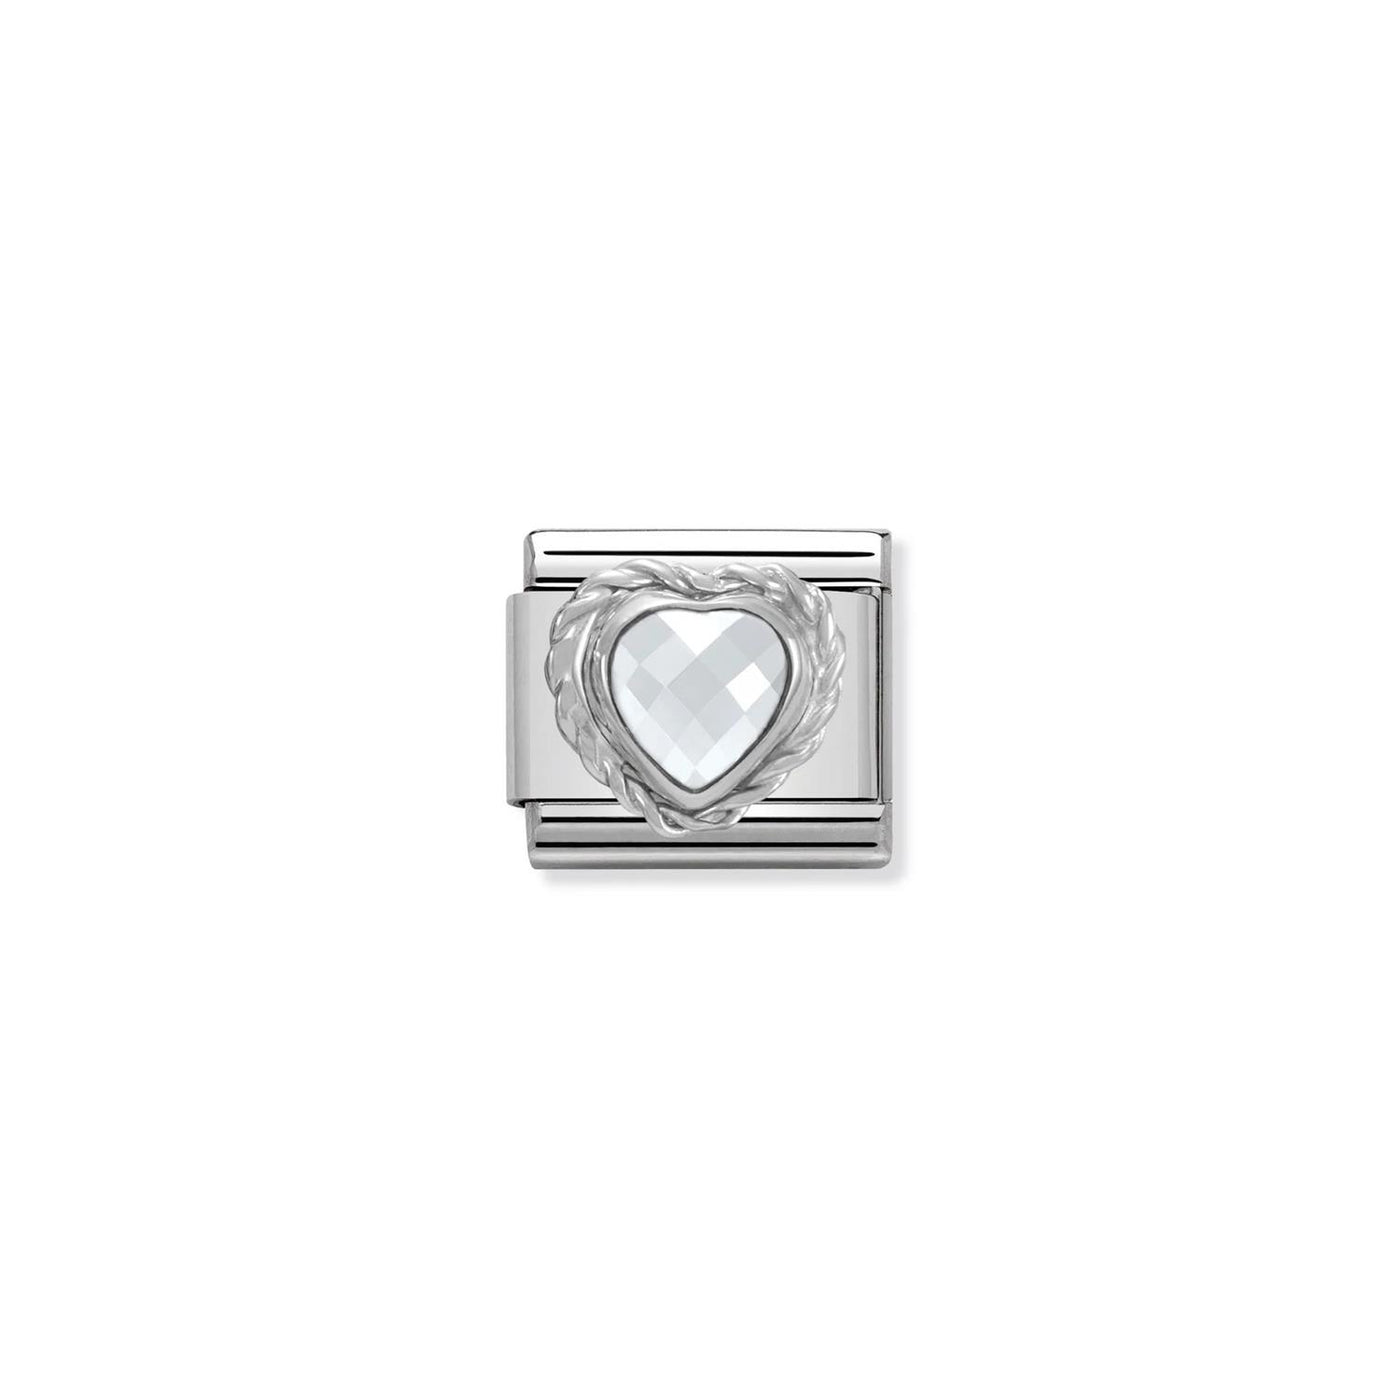 Heart Faceted CZ 925 sterling silver twisted setting and CZ White